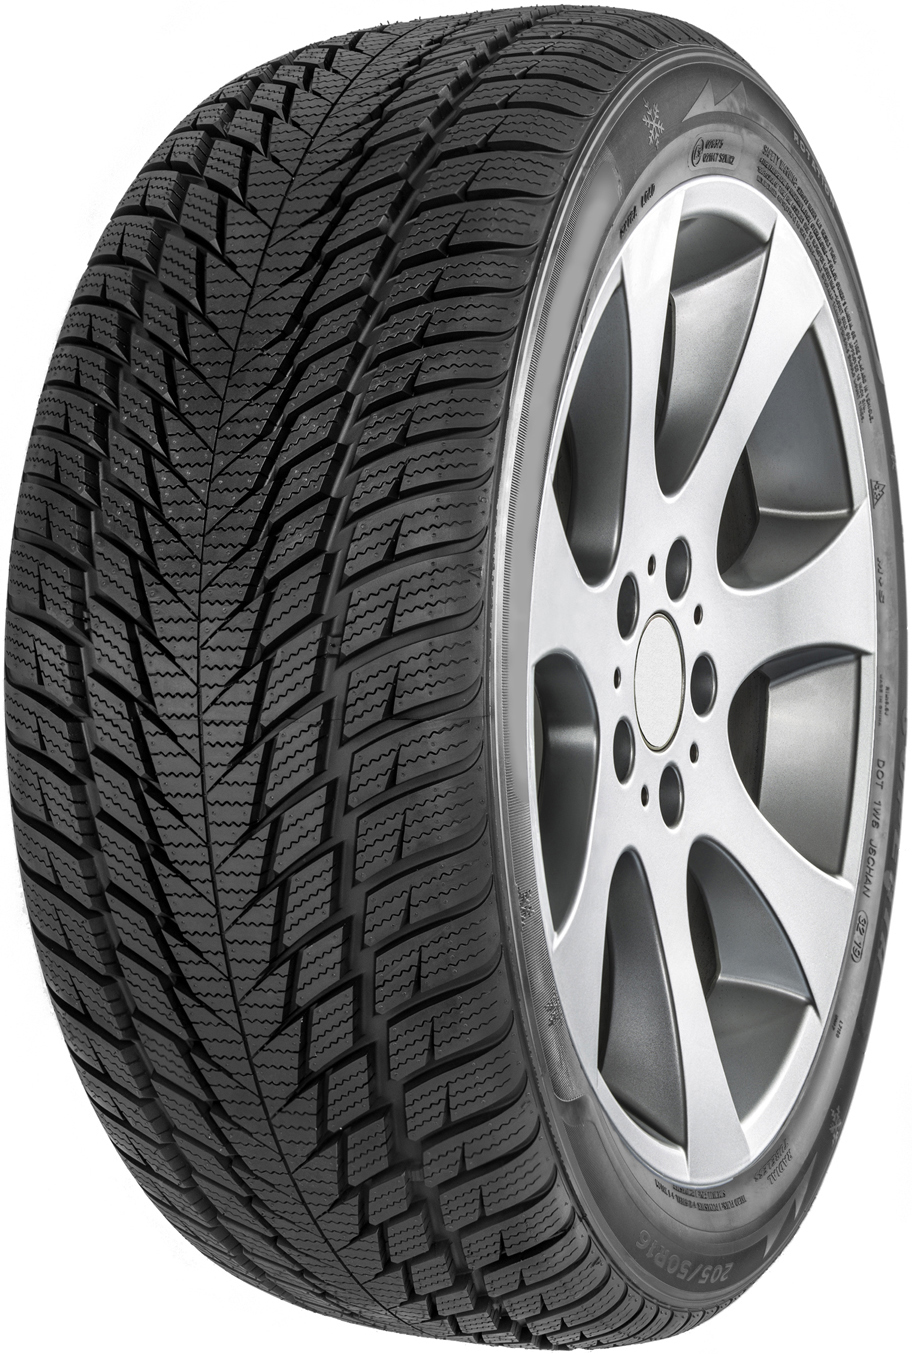 FORTUNA GOWIN UHP 2 XL 205/45 R16 87H